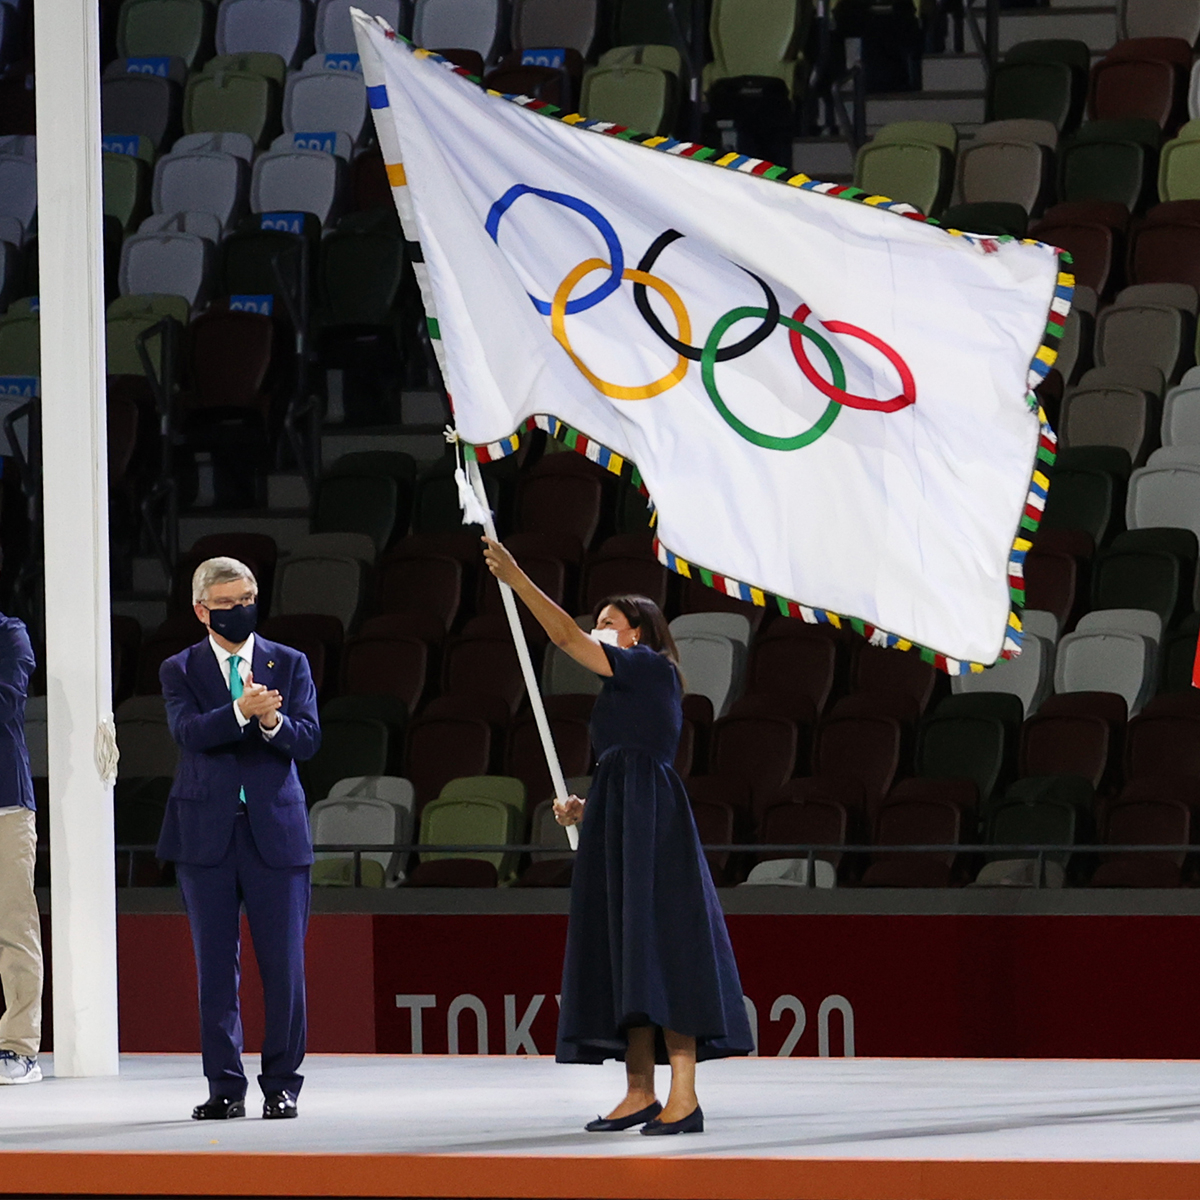 See Every Epic Moment at the 2020 Tokyo Olympics Closing Ceremony